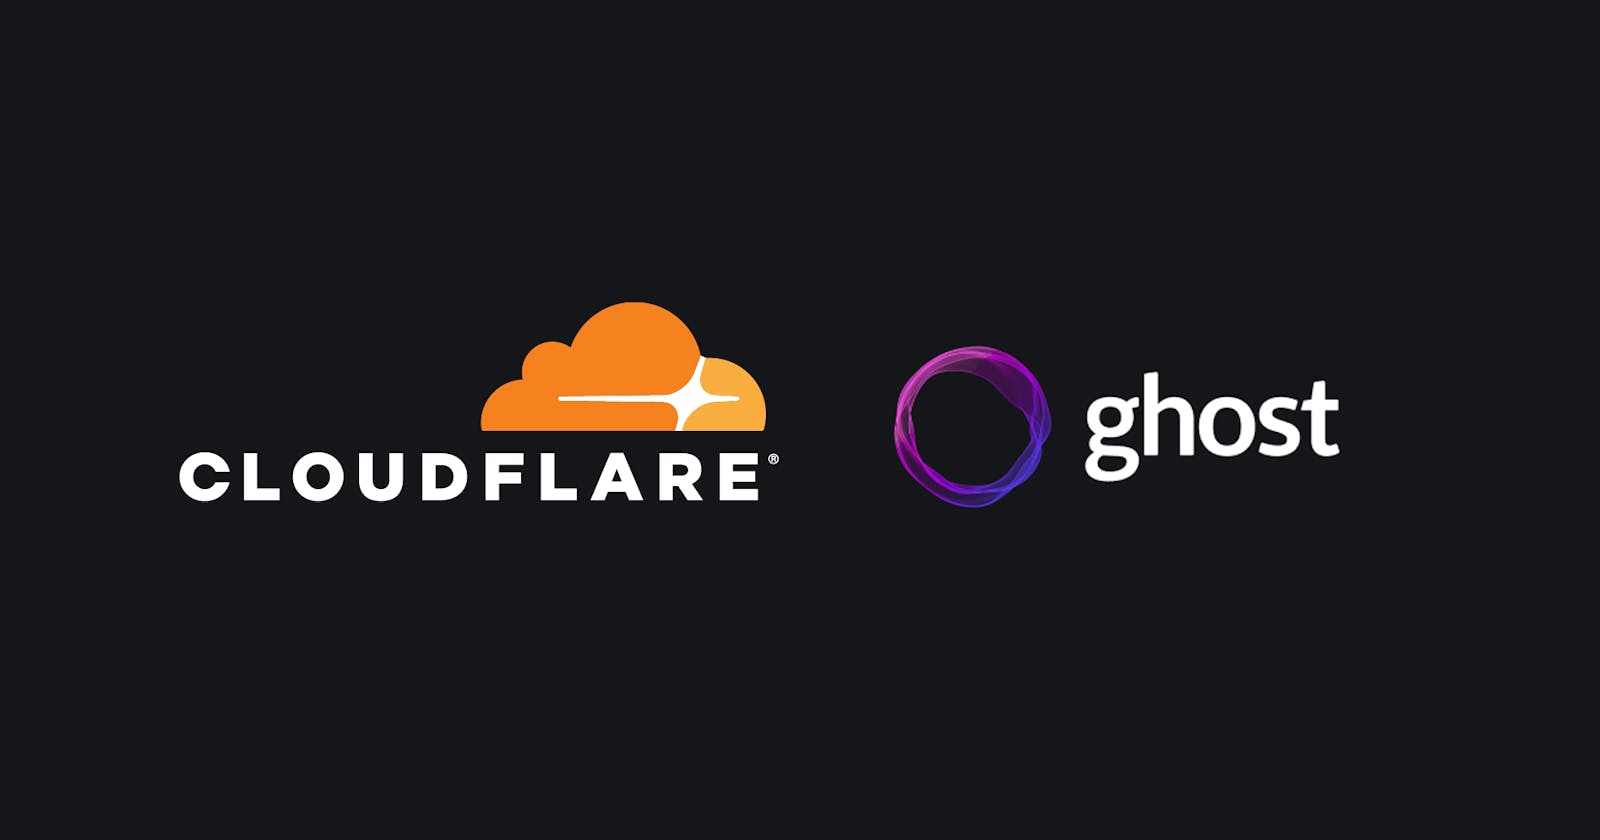 How To Install And Host Ghost With Cloudflare Argo Tunnel.